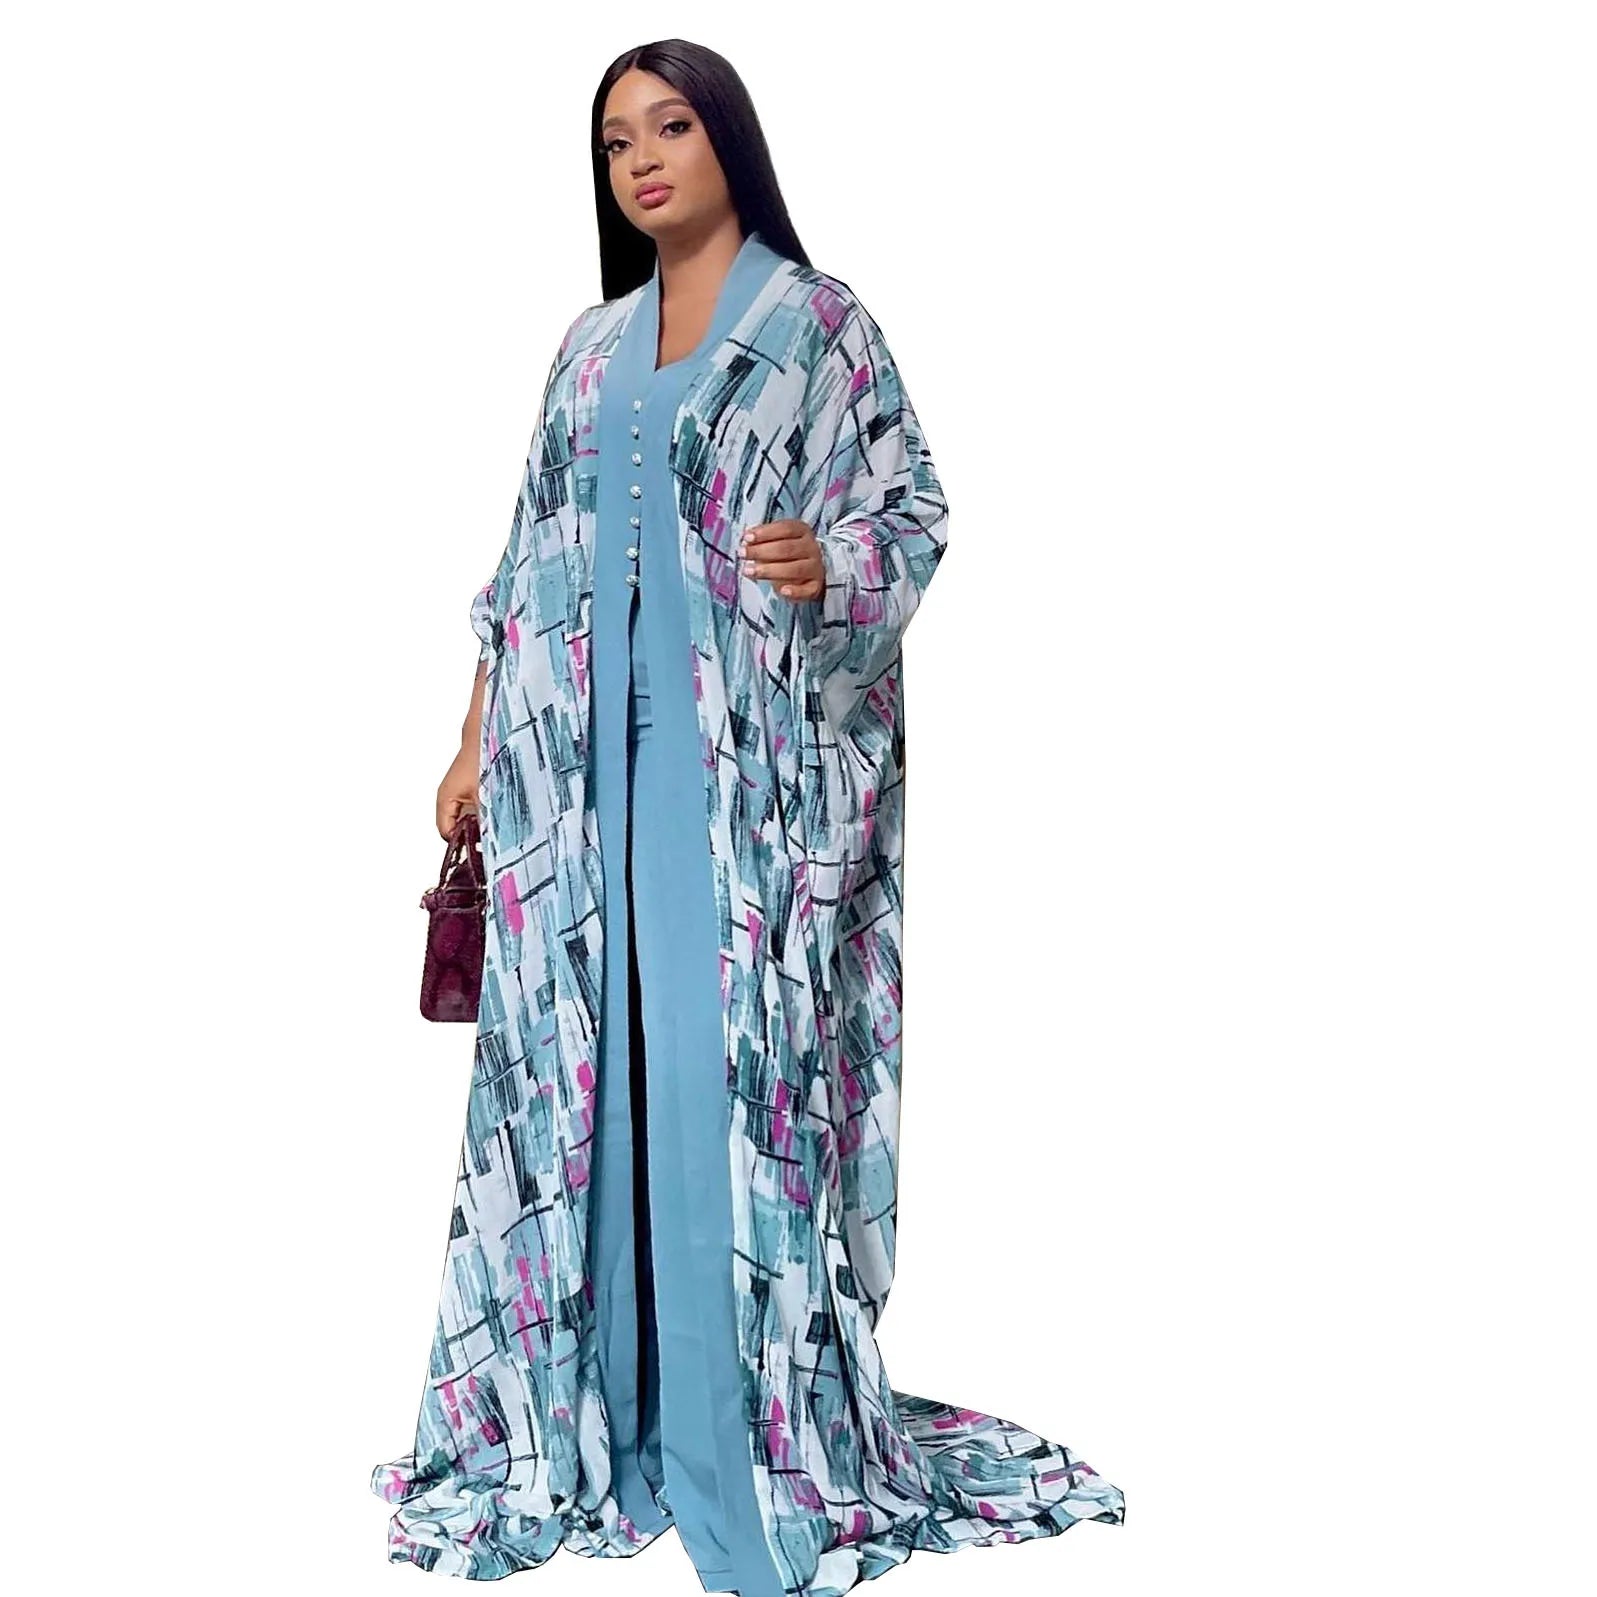 Floral Chic: 2PC African Women's Clothing Set - Cardigan Robe and Pant Suit with Vibrant Kanga Outfits - Flexi Africa - Flexi Africa offers Free Delivery Worldwide - Vibrant African traditional clothing showcasing bold prints and intricate designs